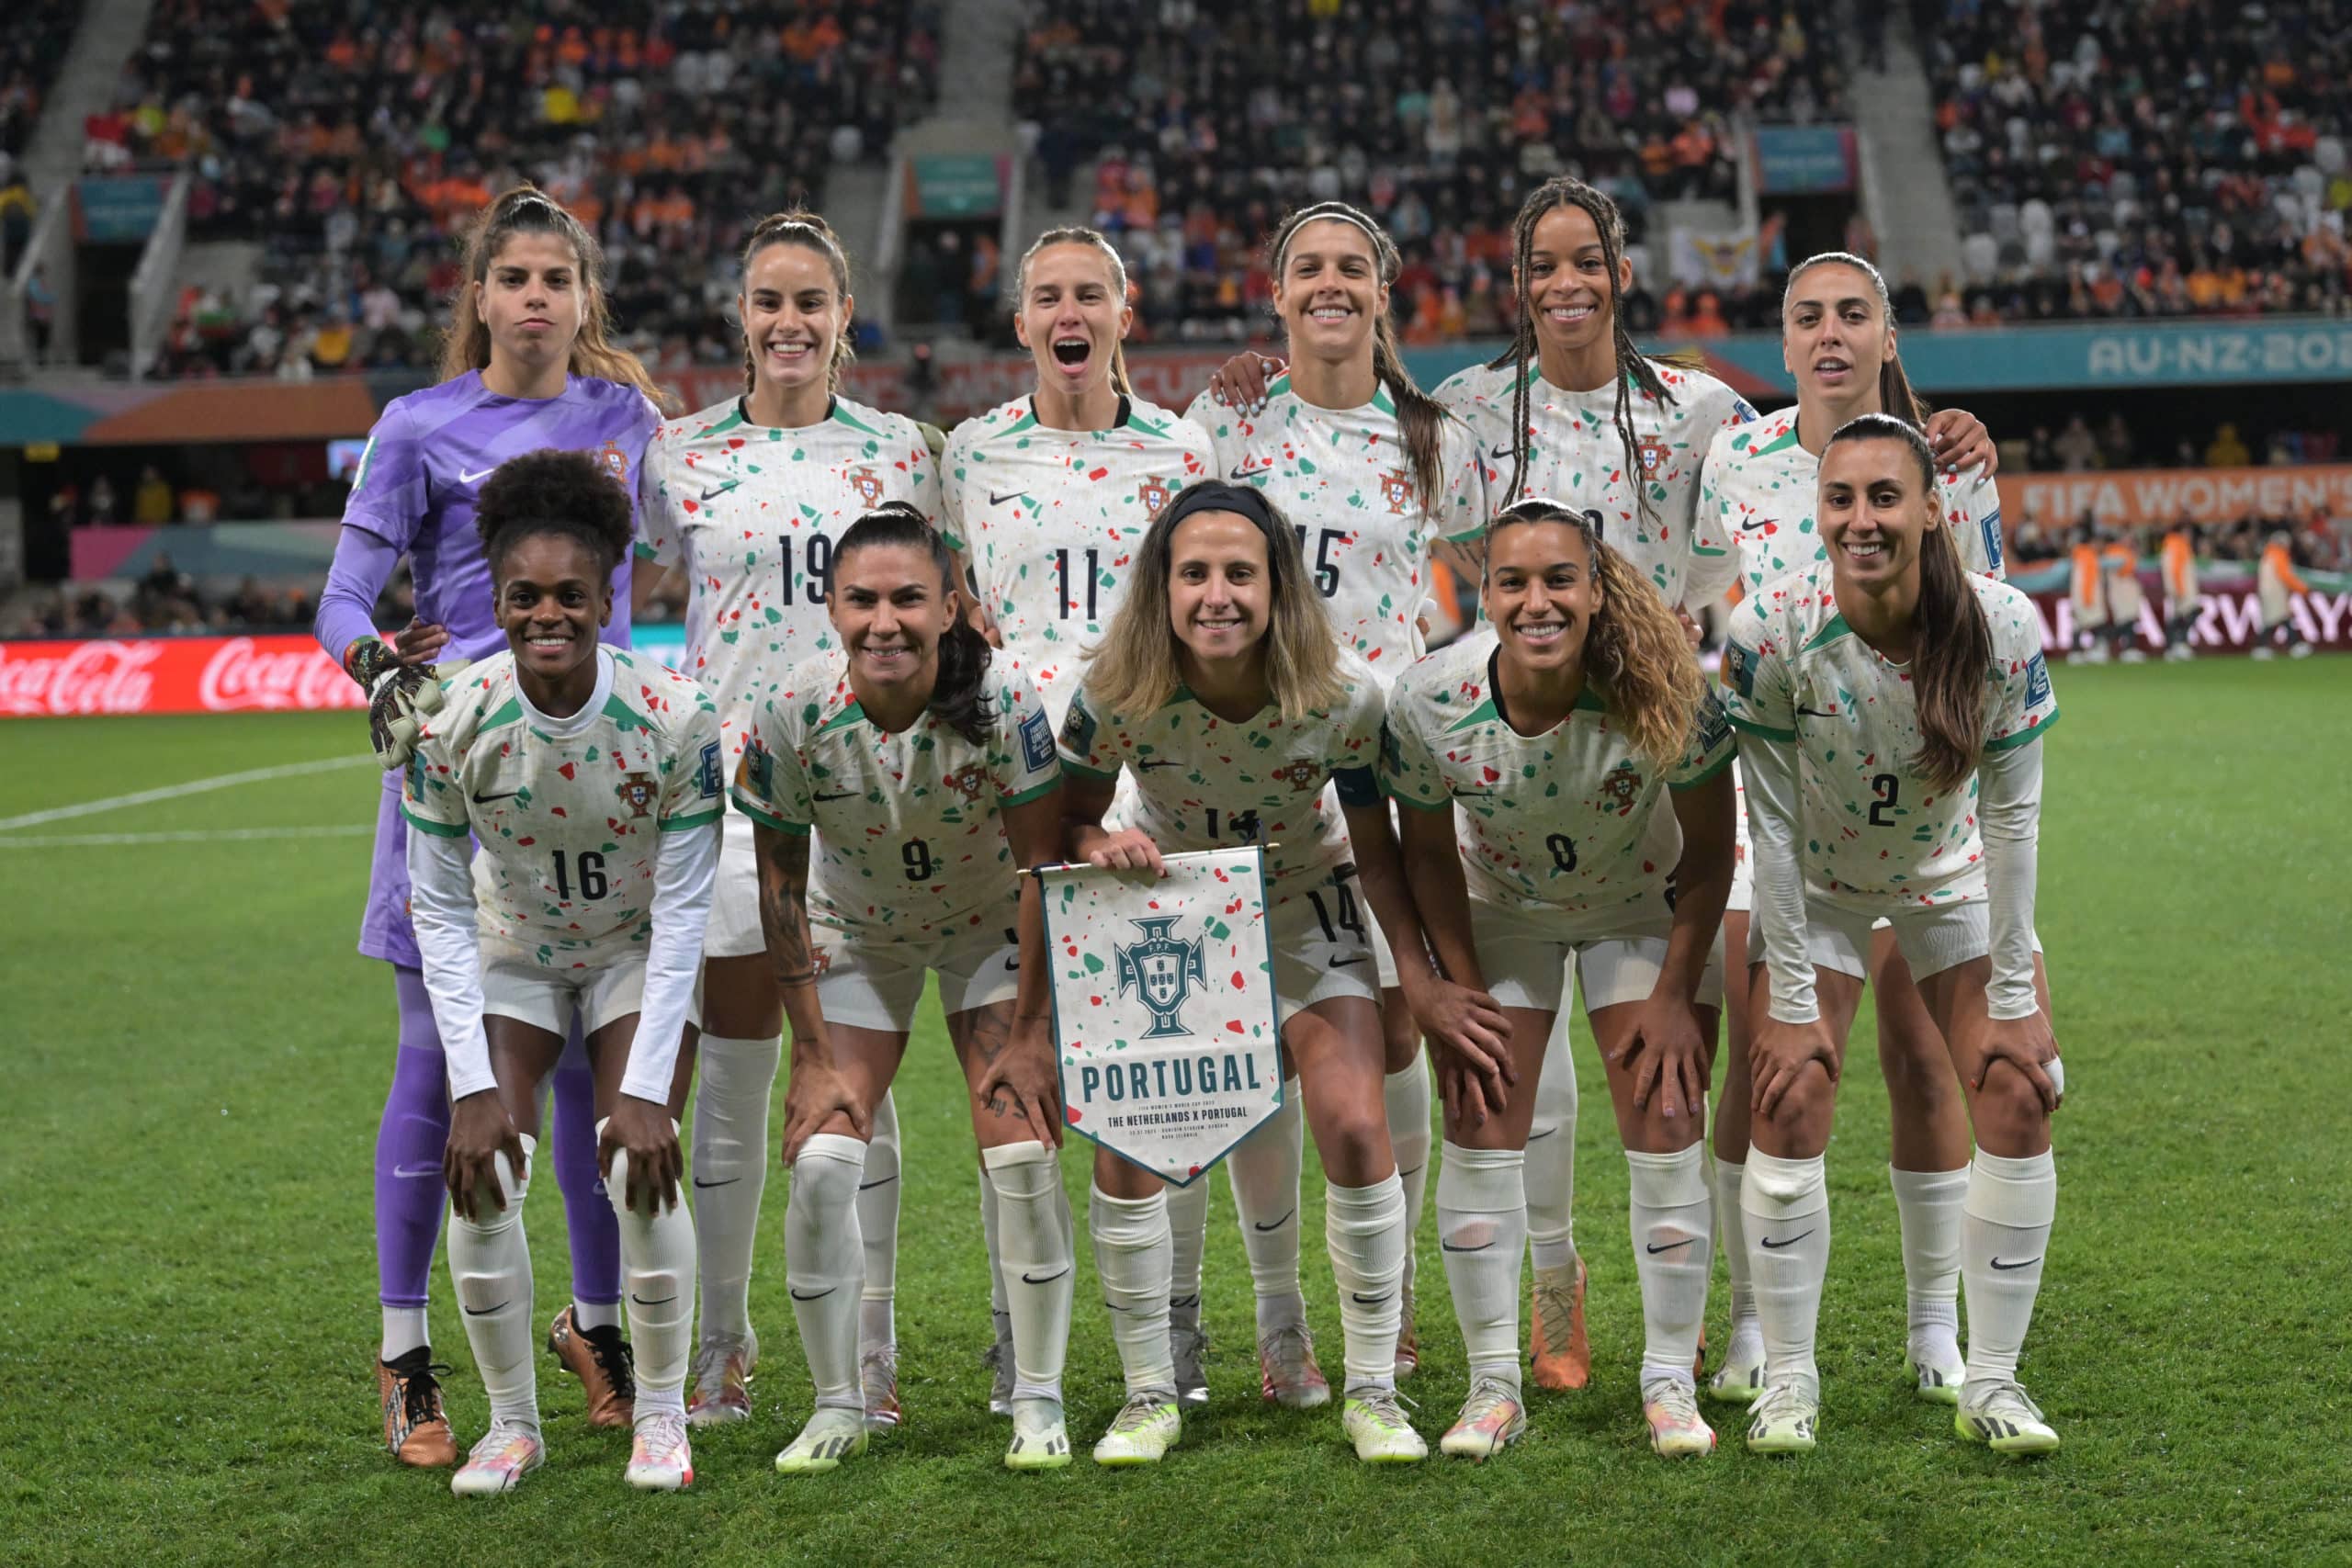 July 23, 2023, Dunedin, New Zealand: Portugal Women soccer team pose for a group photo during the FIFA Women s World Cup